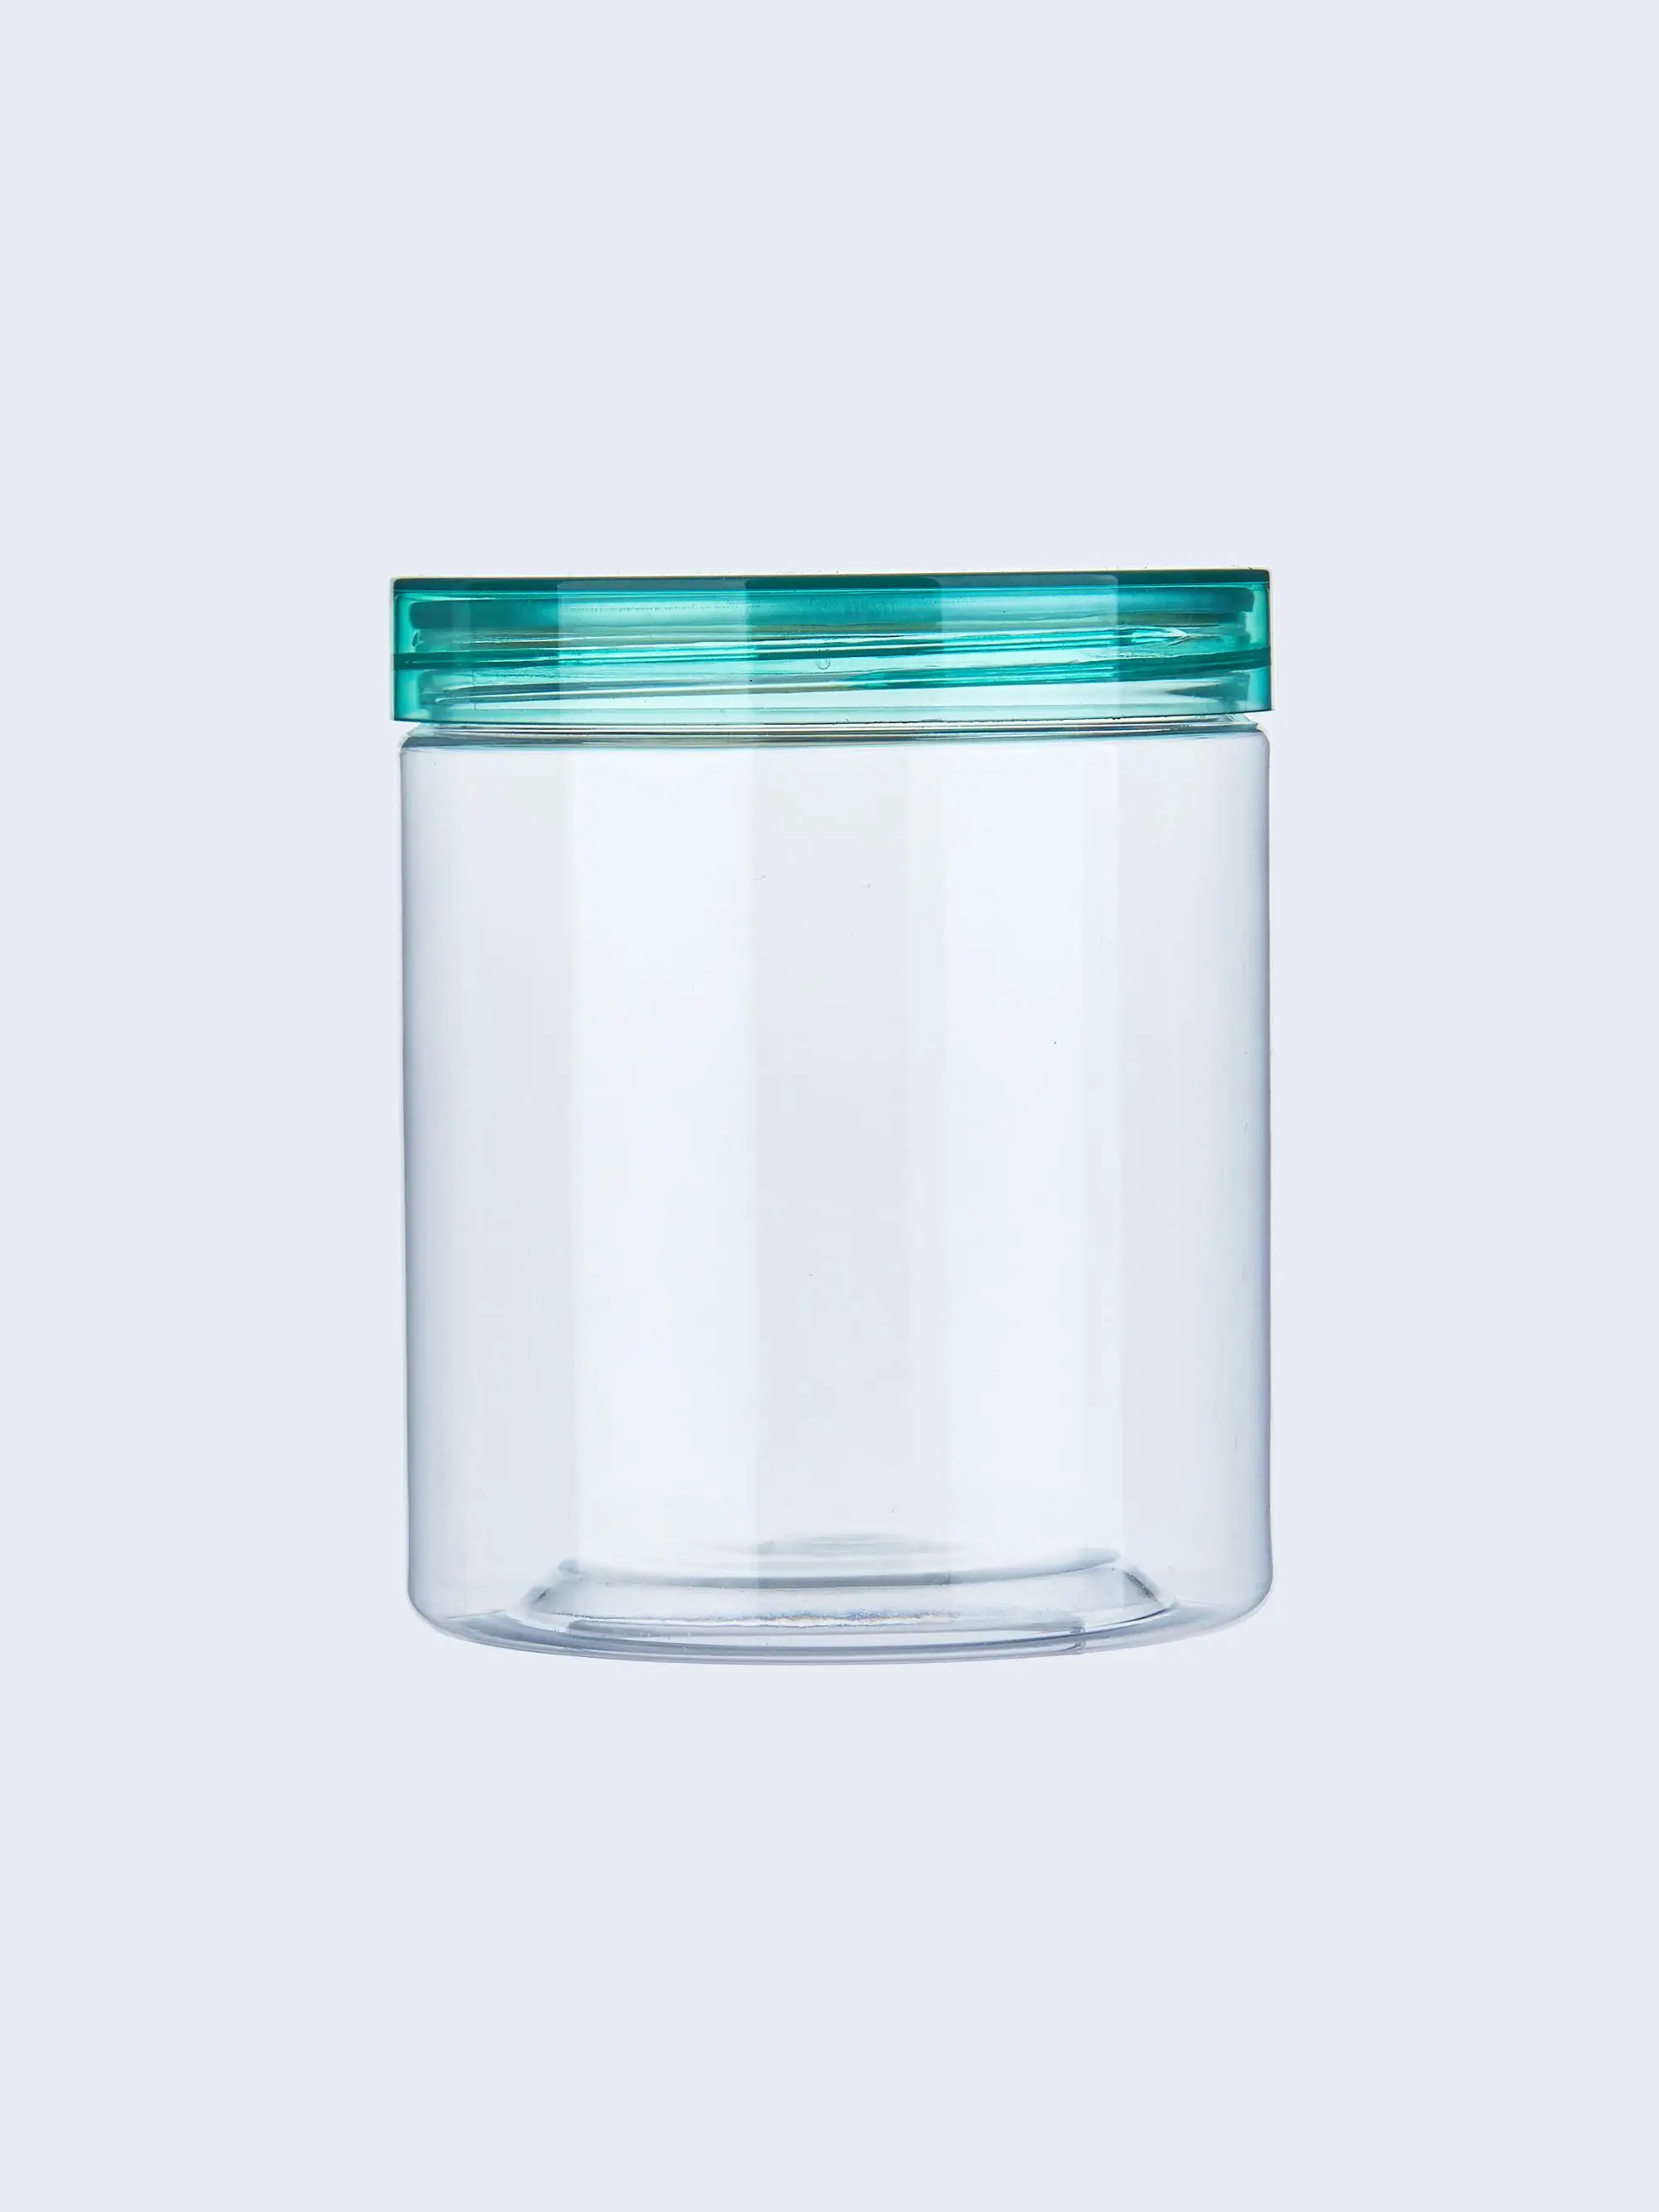 factory supply clear plastic jar 350ml for food packing